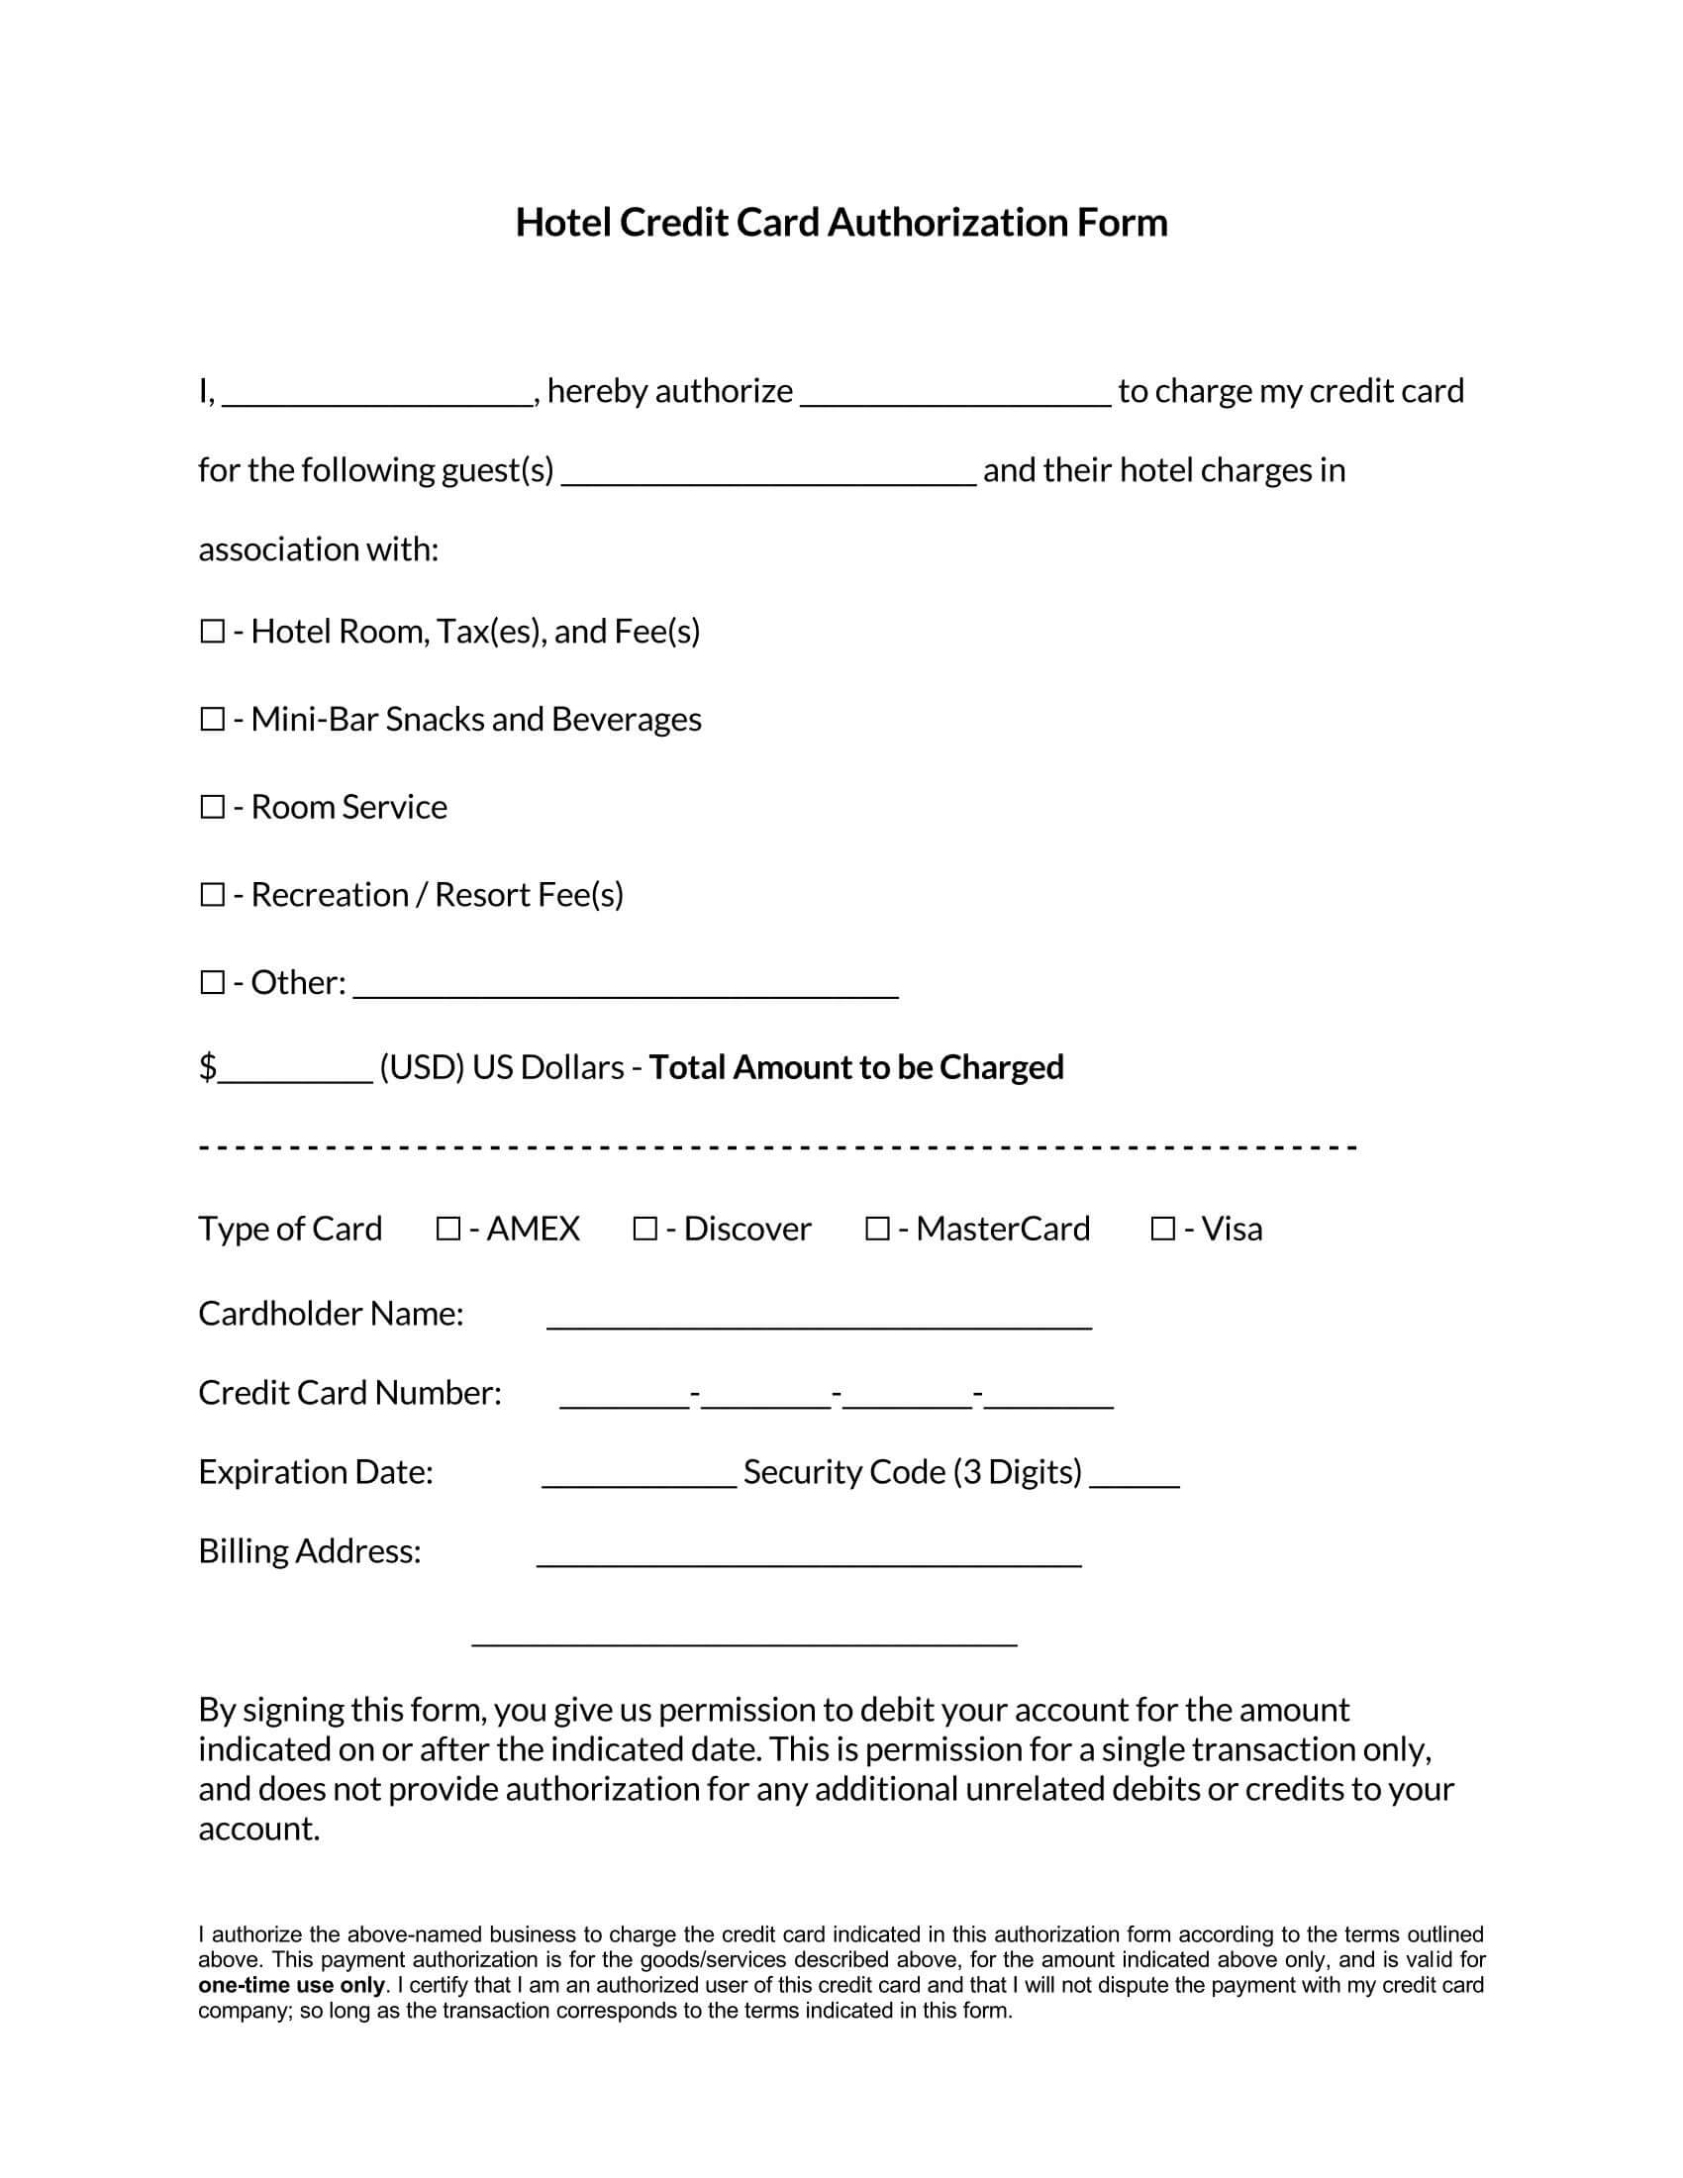 Free Credit Card Authorization Form Templates [Word – Pdf] Throughout Hotel Credit Card Authorization Form Template